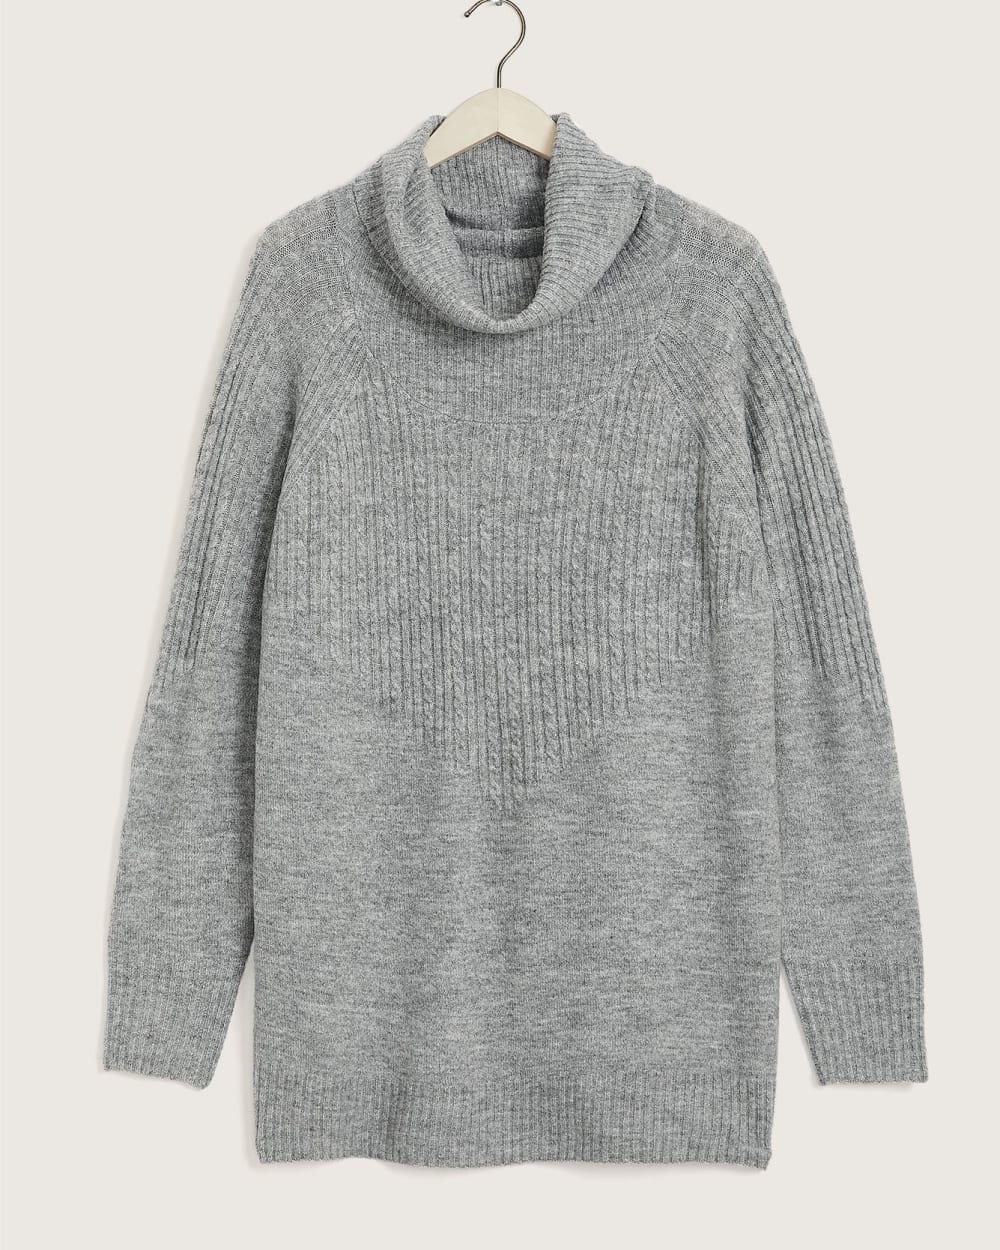 Tunic Sweater with Cowl Neck | Penningtons